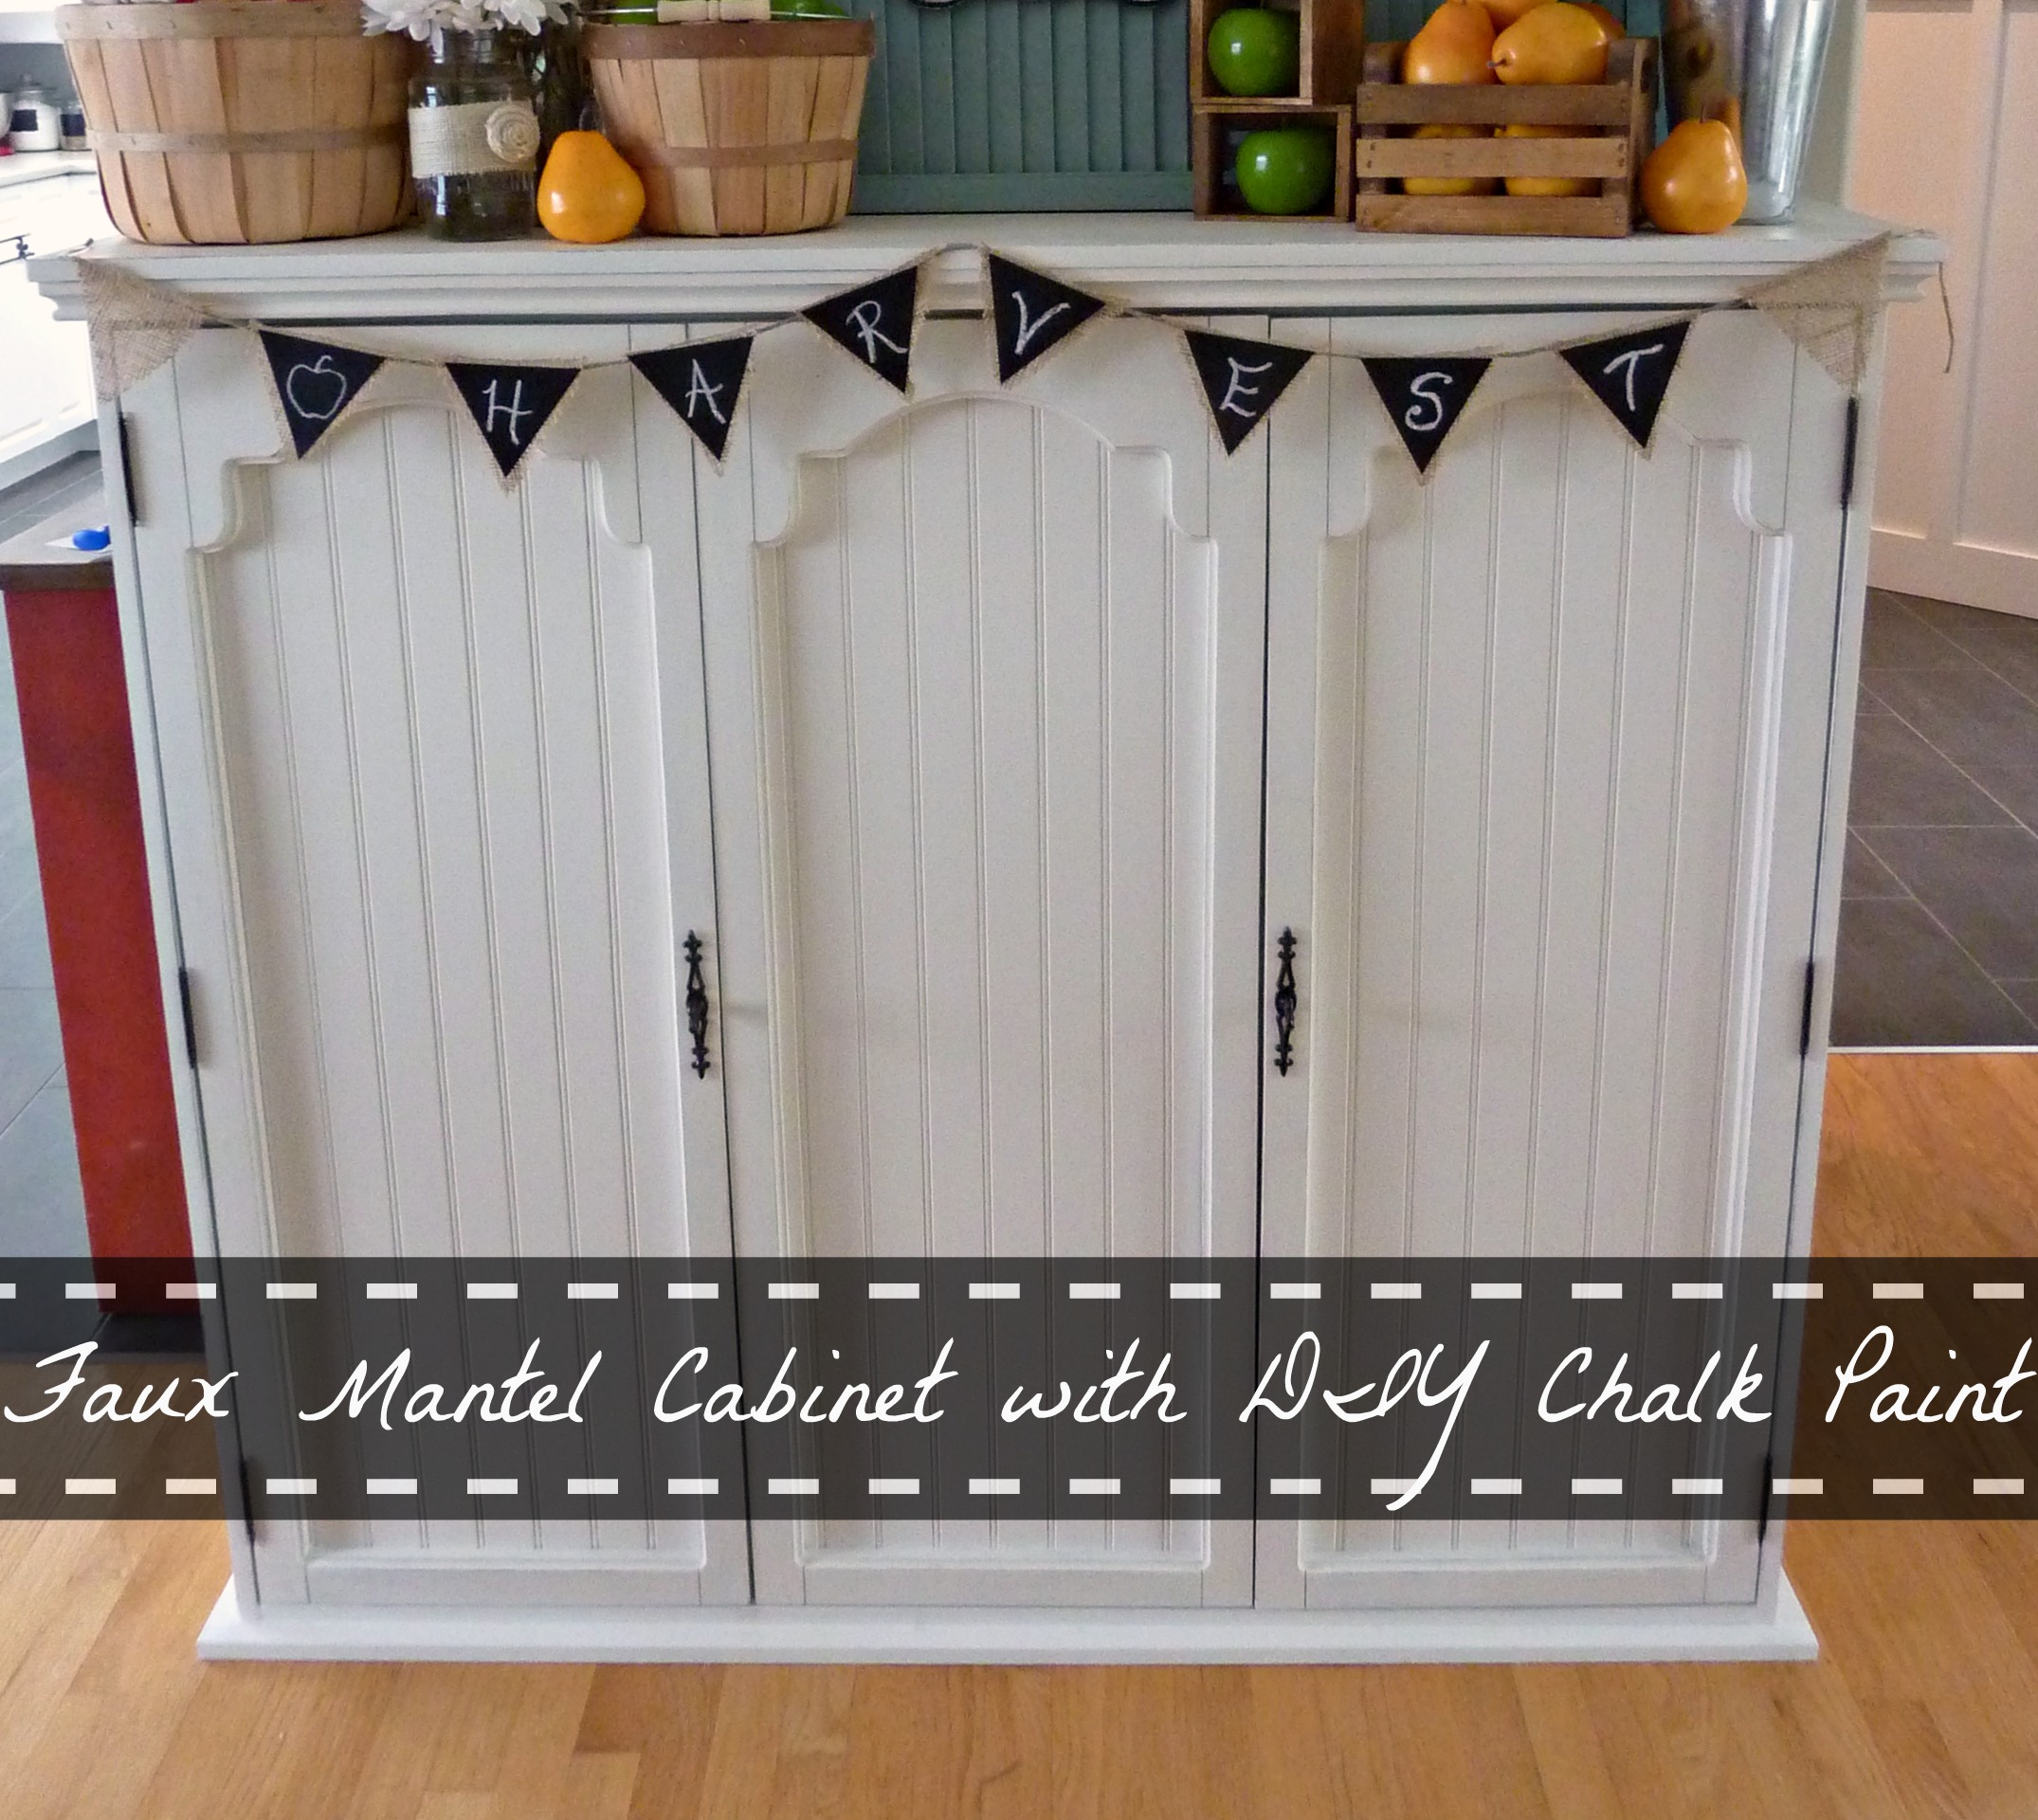 Faux Mantel Cabinet from an Old China Hutch using DIY Chalk Paint